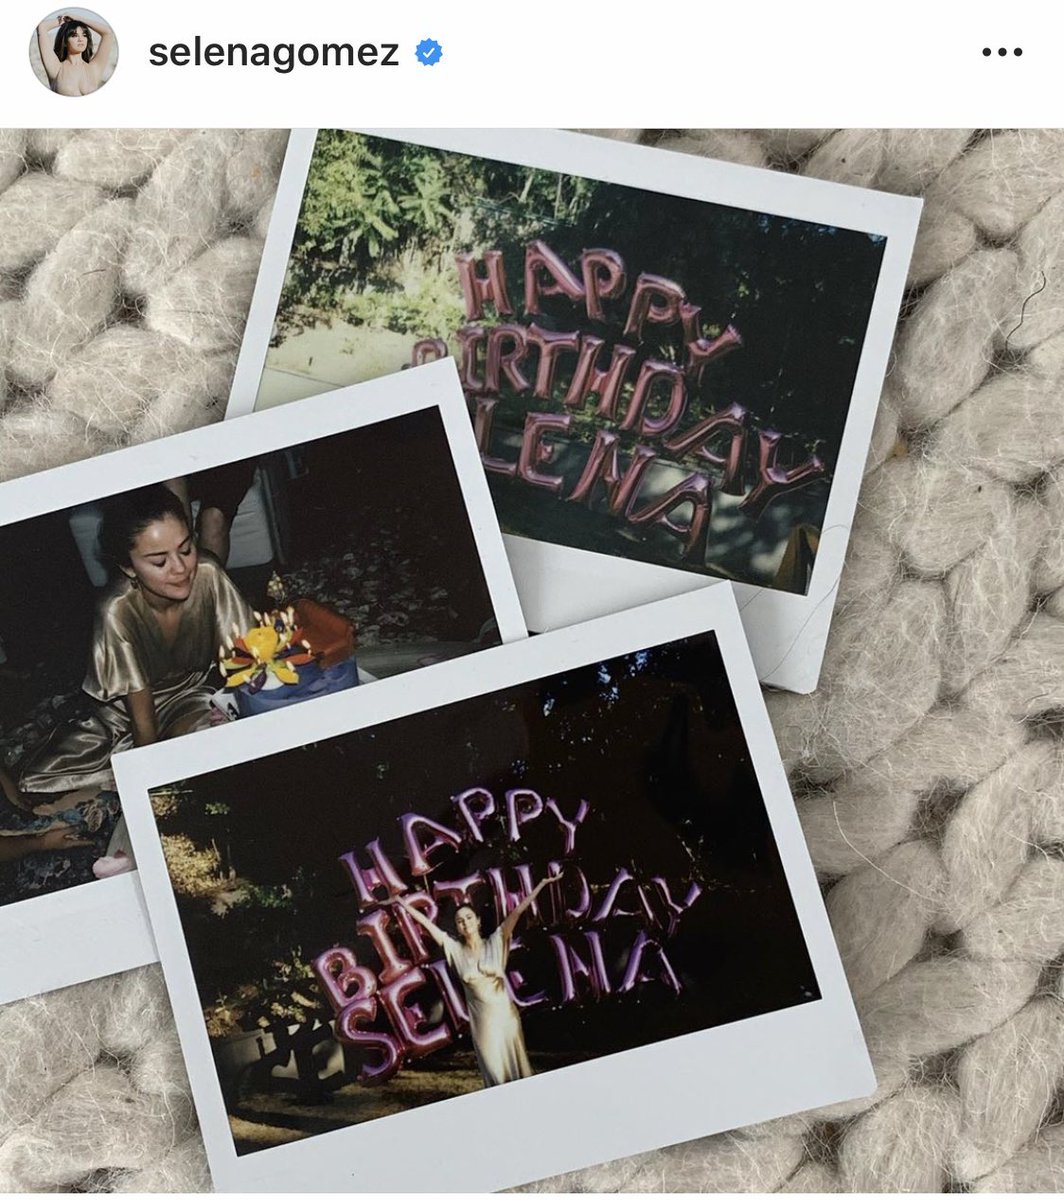 Going back to the BLACKPINKs mystery feature post, which was posted on Selena’s birthday, some fans have noticed how similar the background appears to a cake. It was also noted by fans how Selena’s birthday post with her balloons and the background are black and pink.